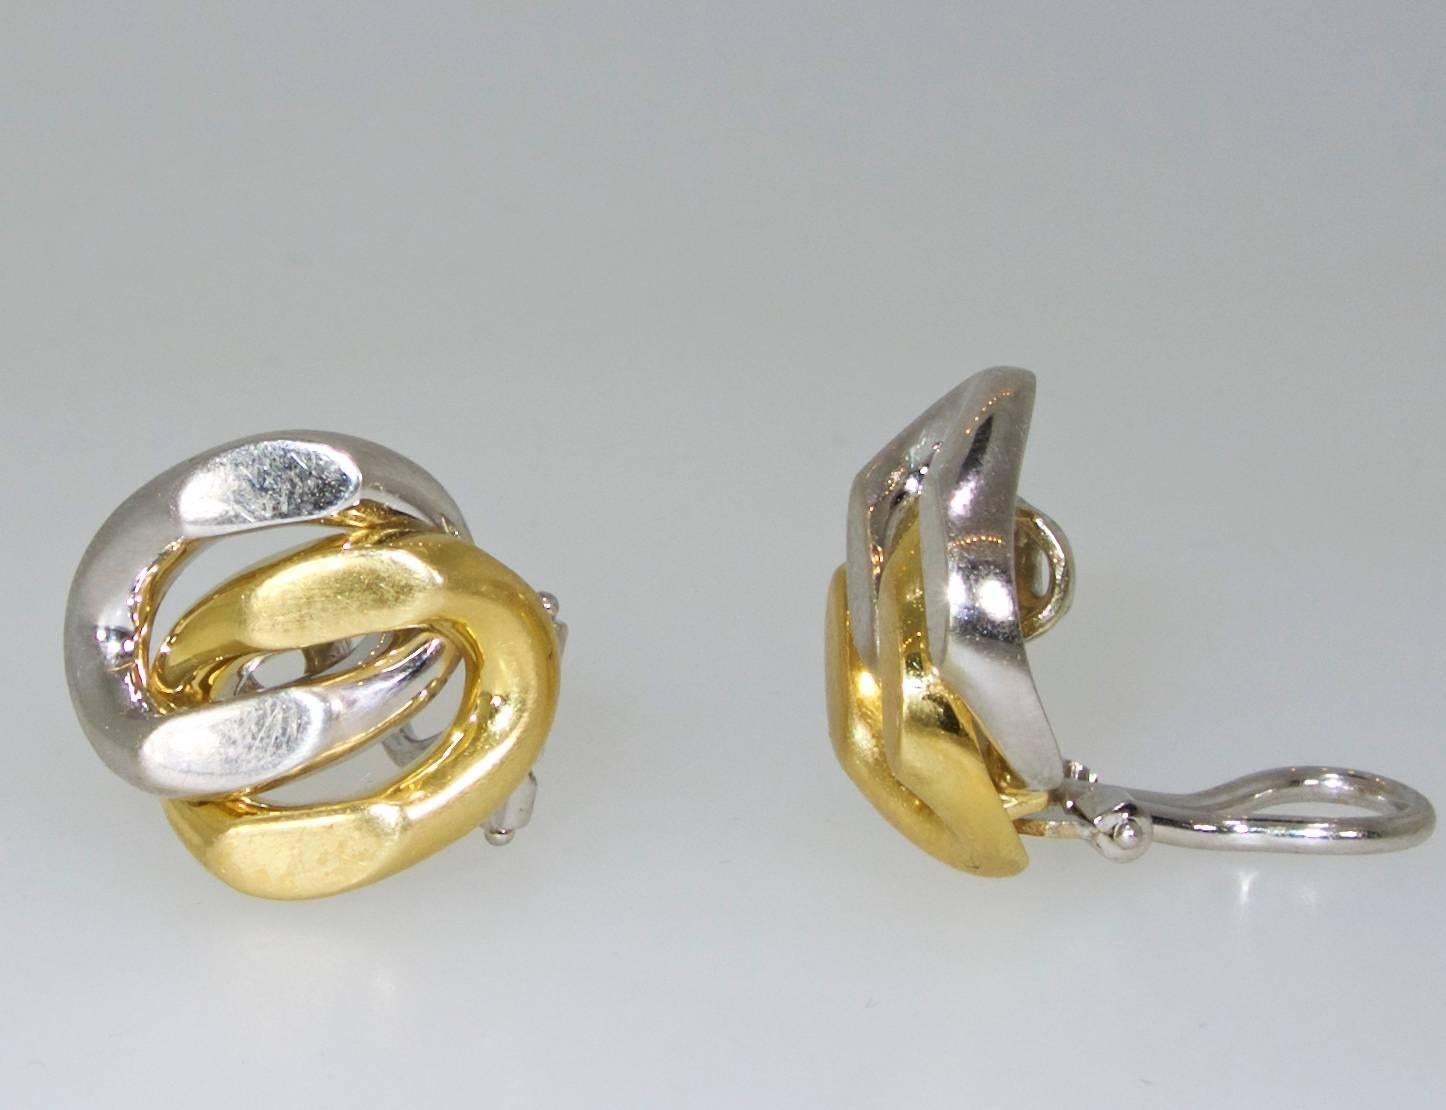 Contemporary 18 Karat Yellow and White Gold Earrings